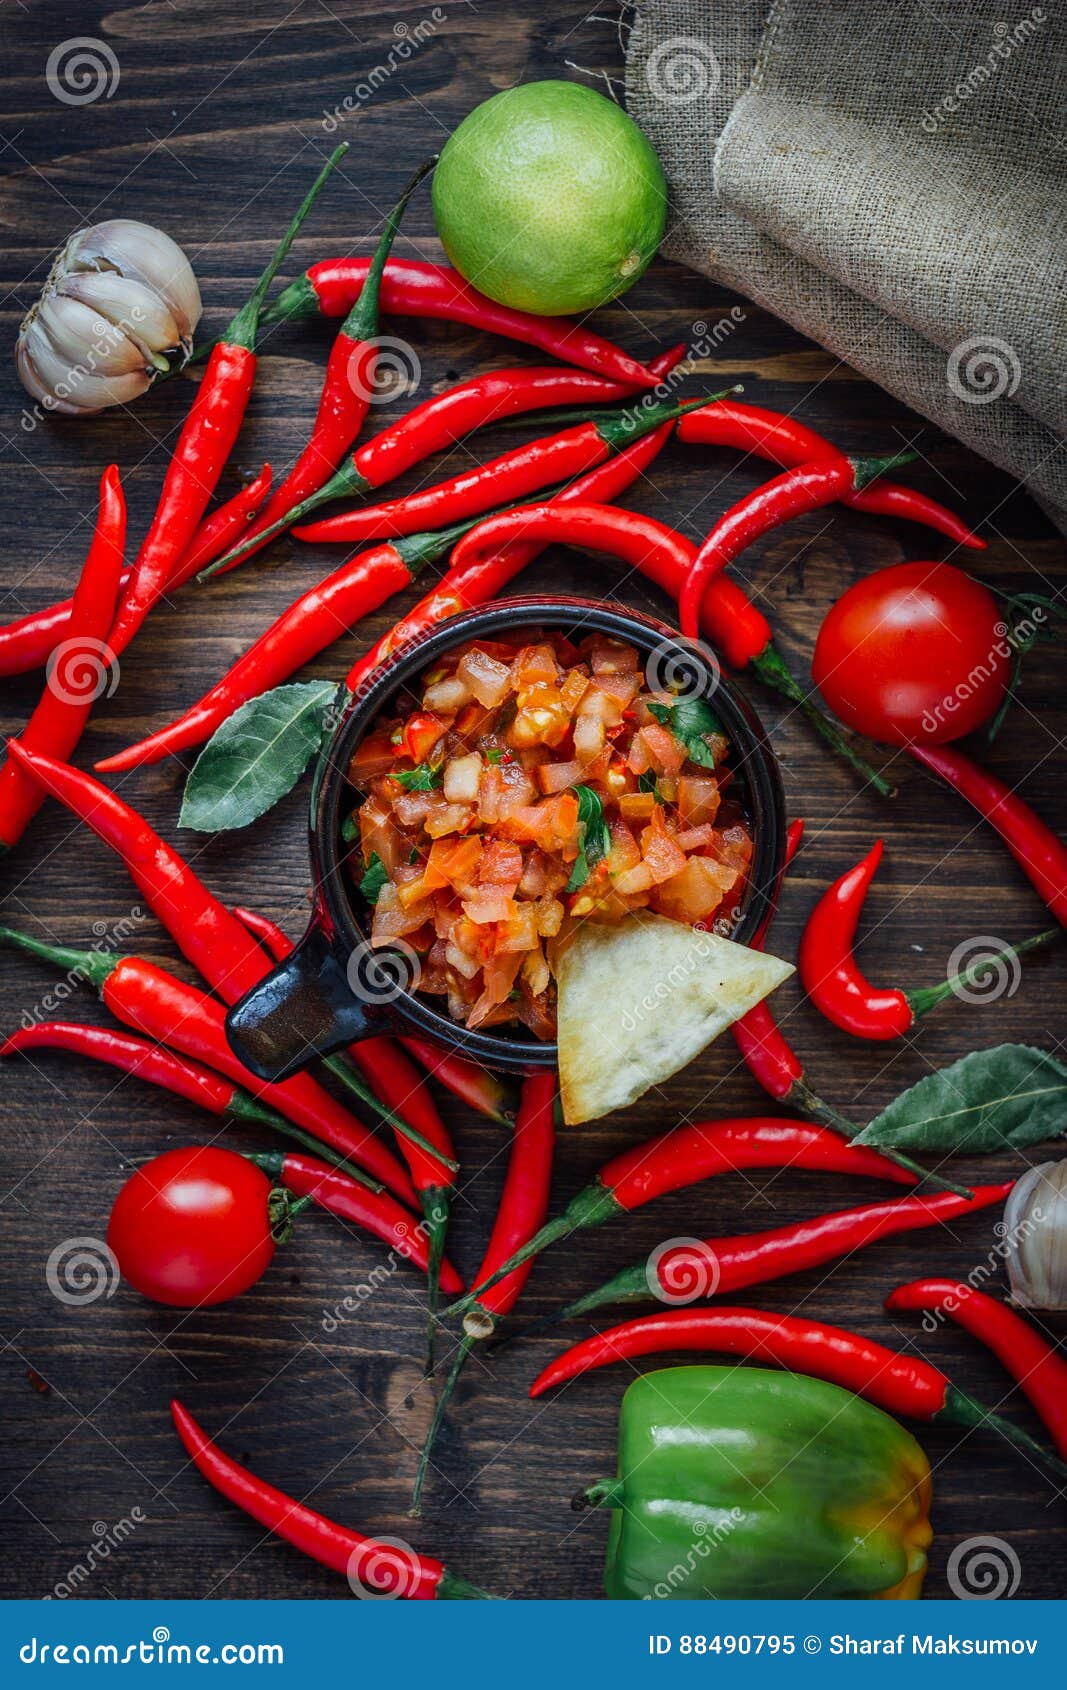 Red Hot Chili Peppers with the Raw Salsa Dip - Hot and Tasty. Stock ...